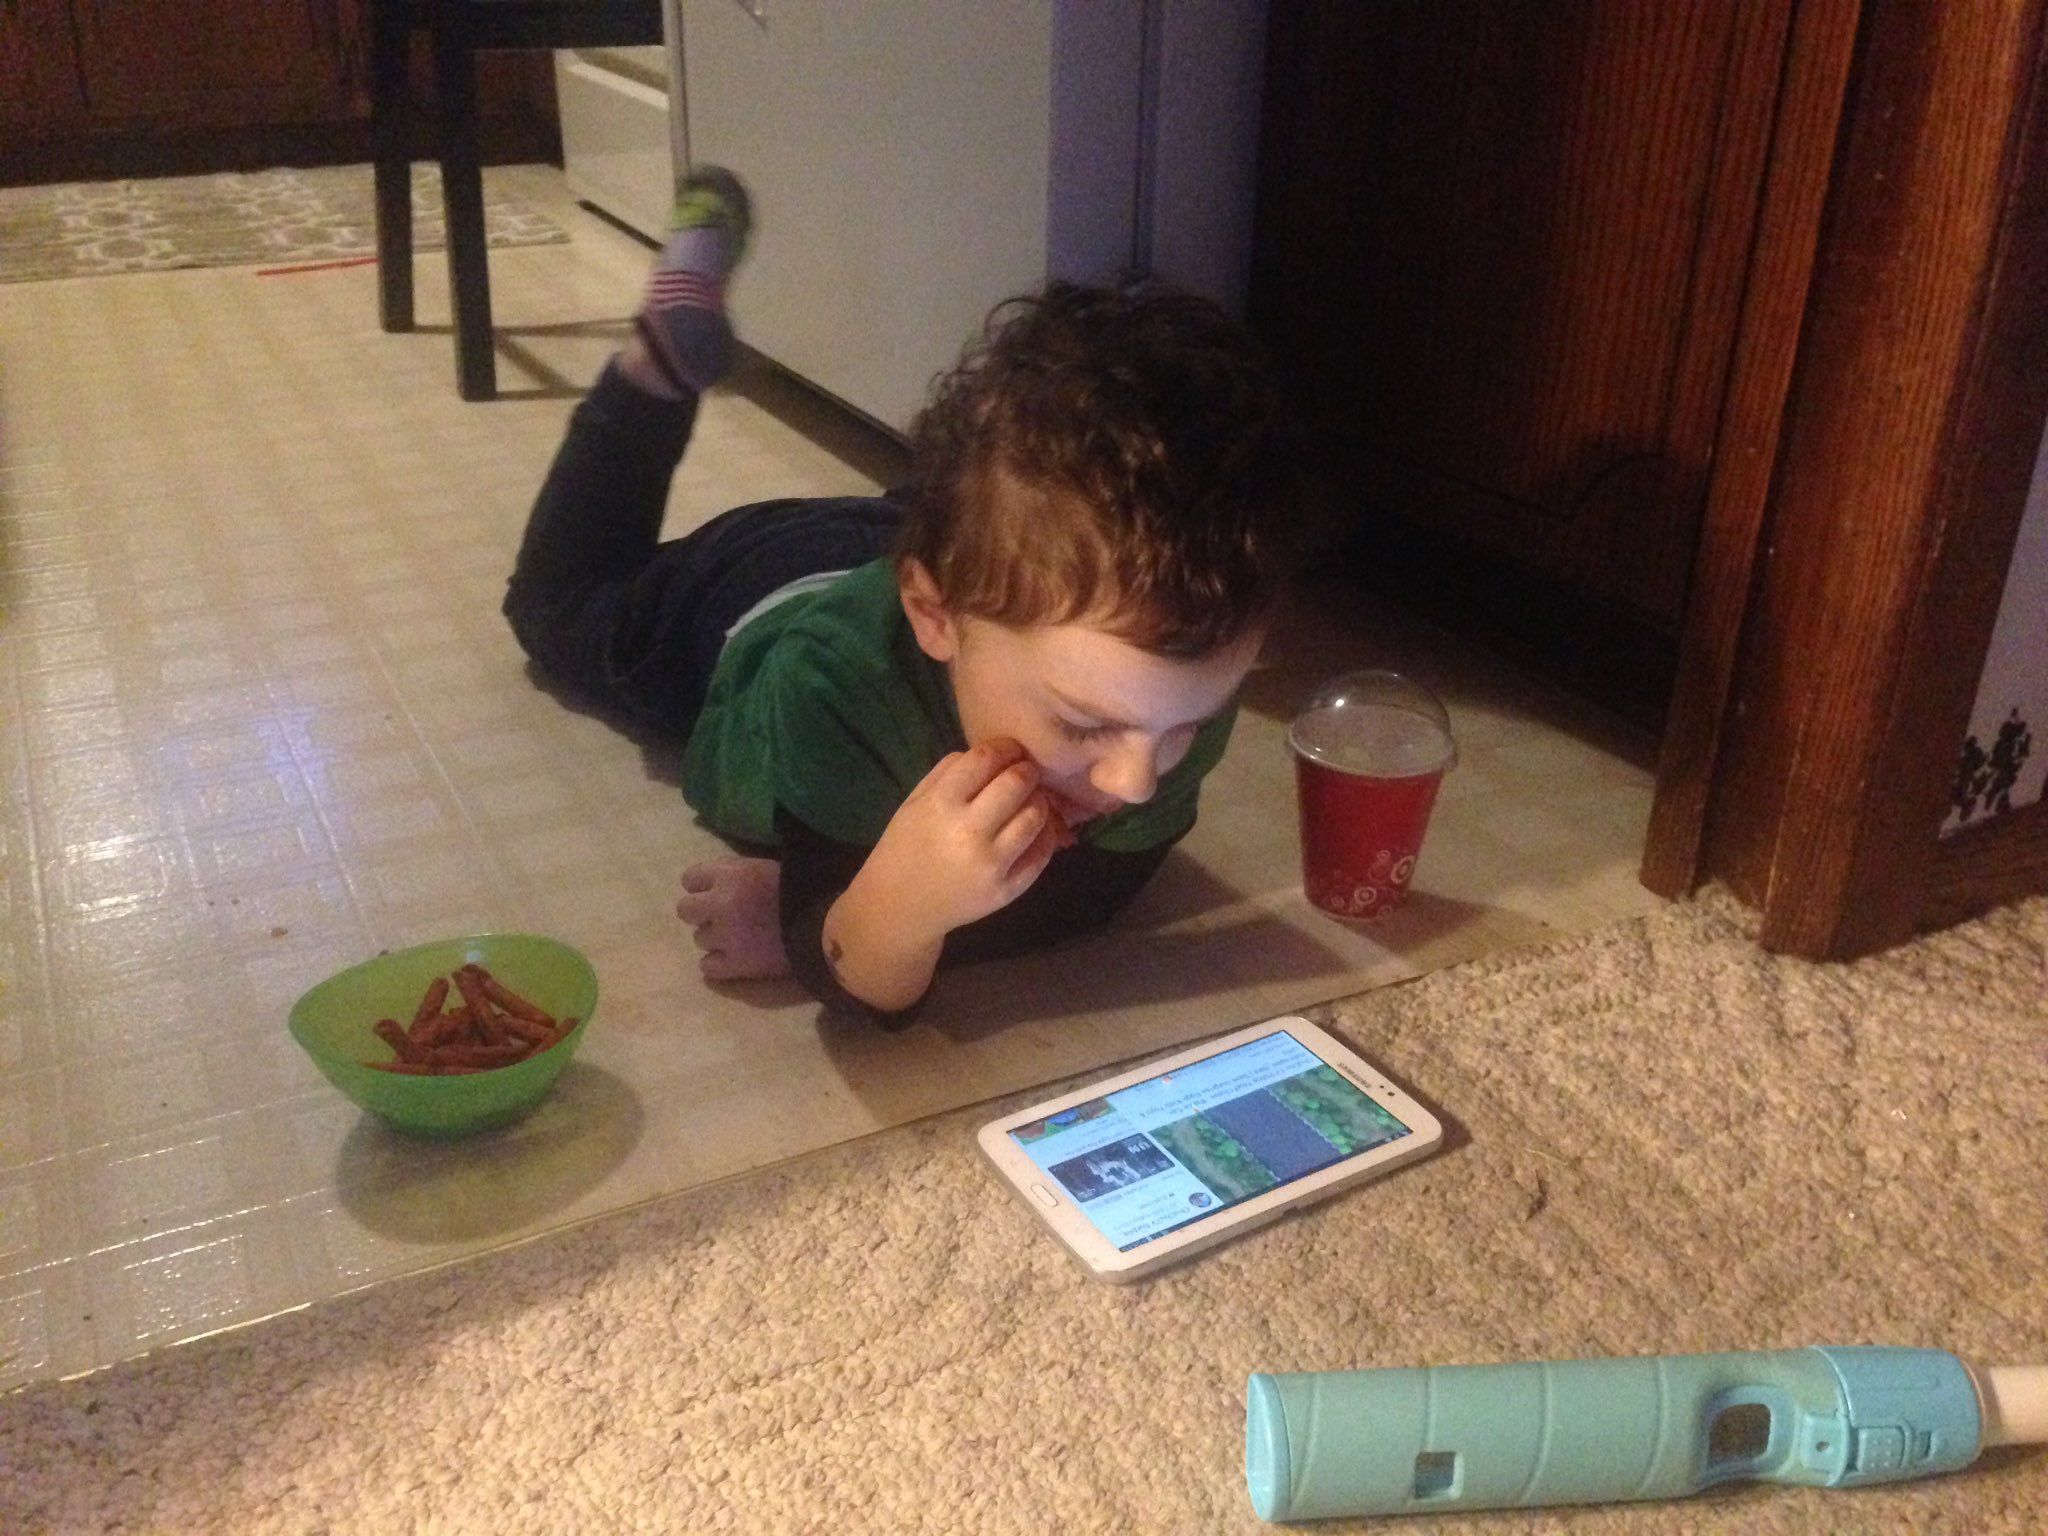 Food isn't allowed in the living room, his tablet isn't allowed in the